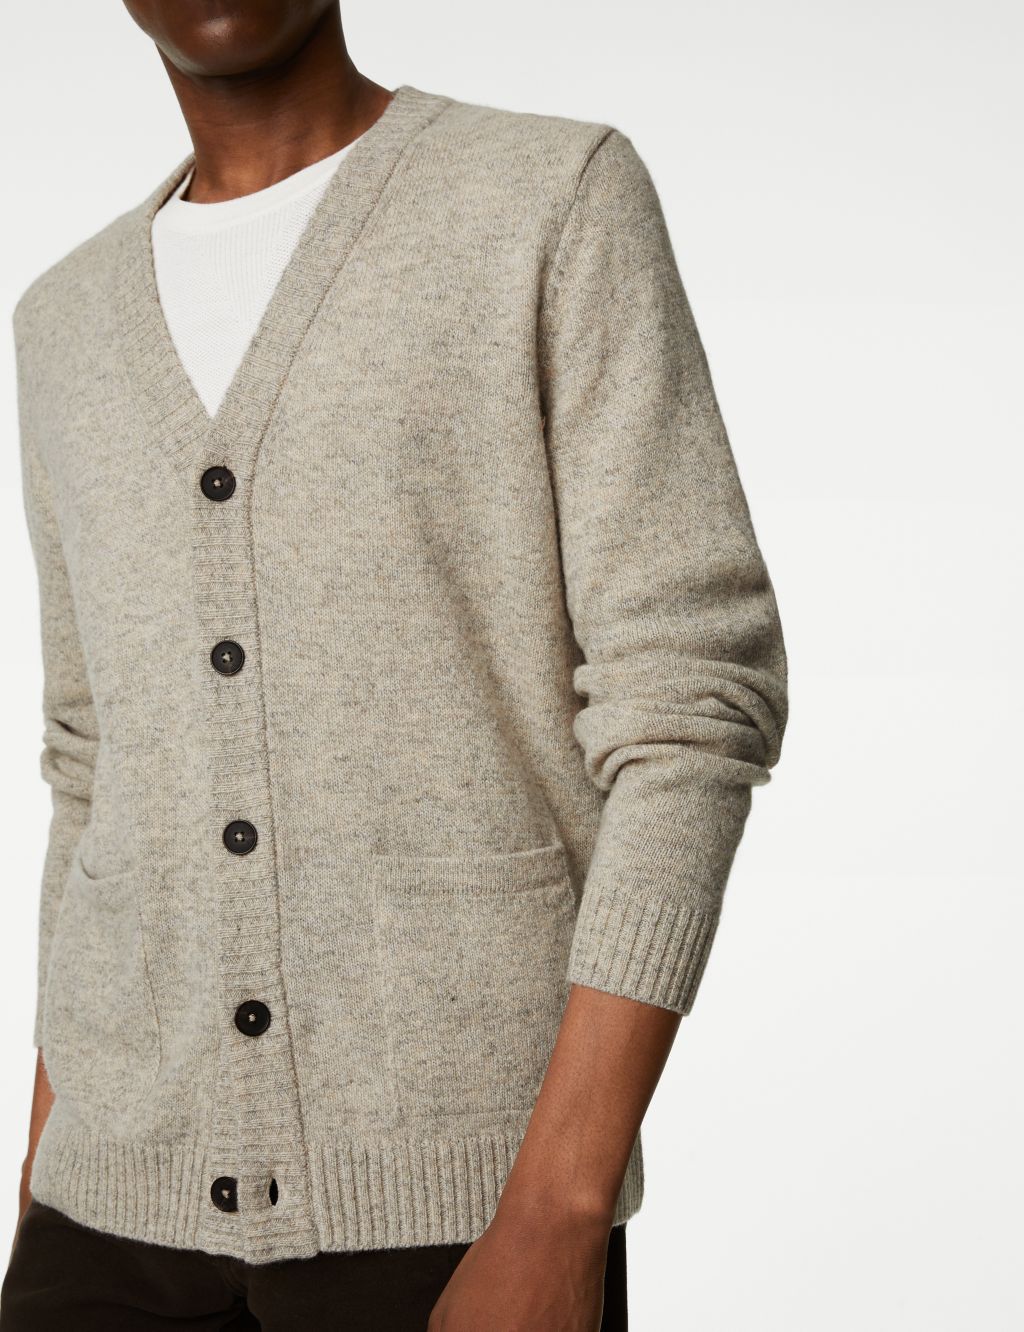 Lambswool Rich V-Neck Cardigan image 3